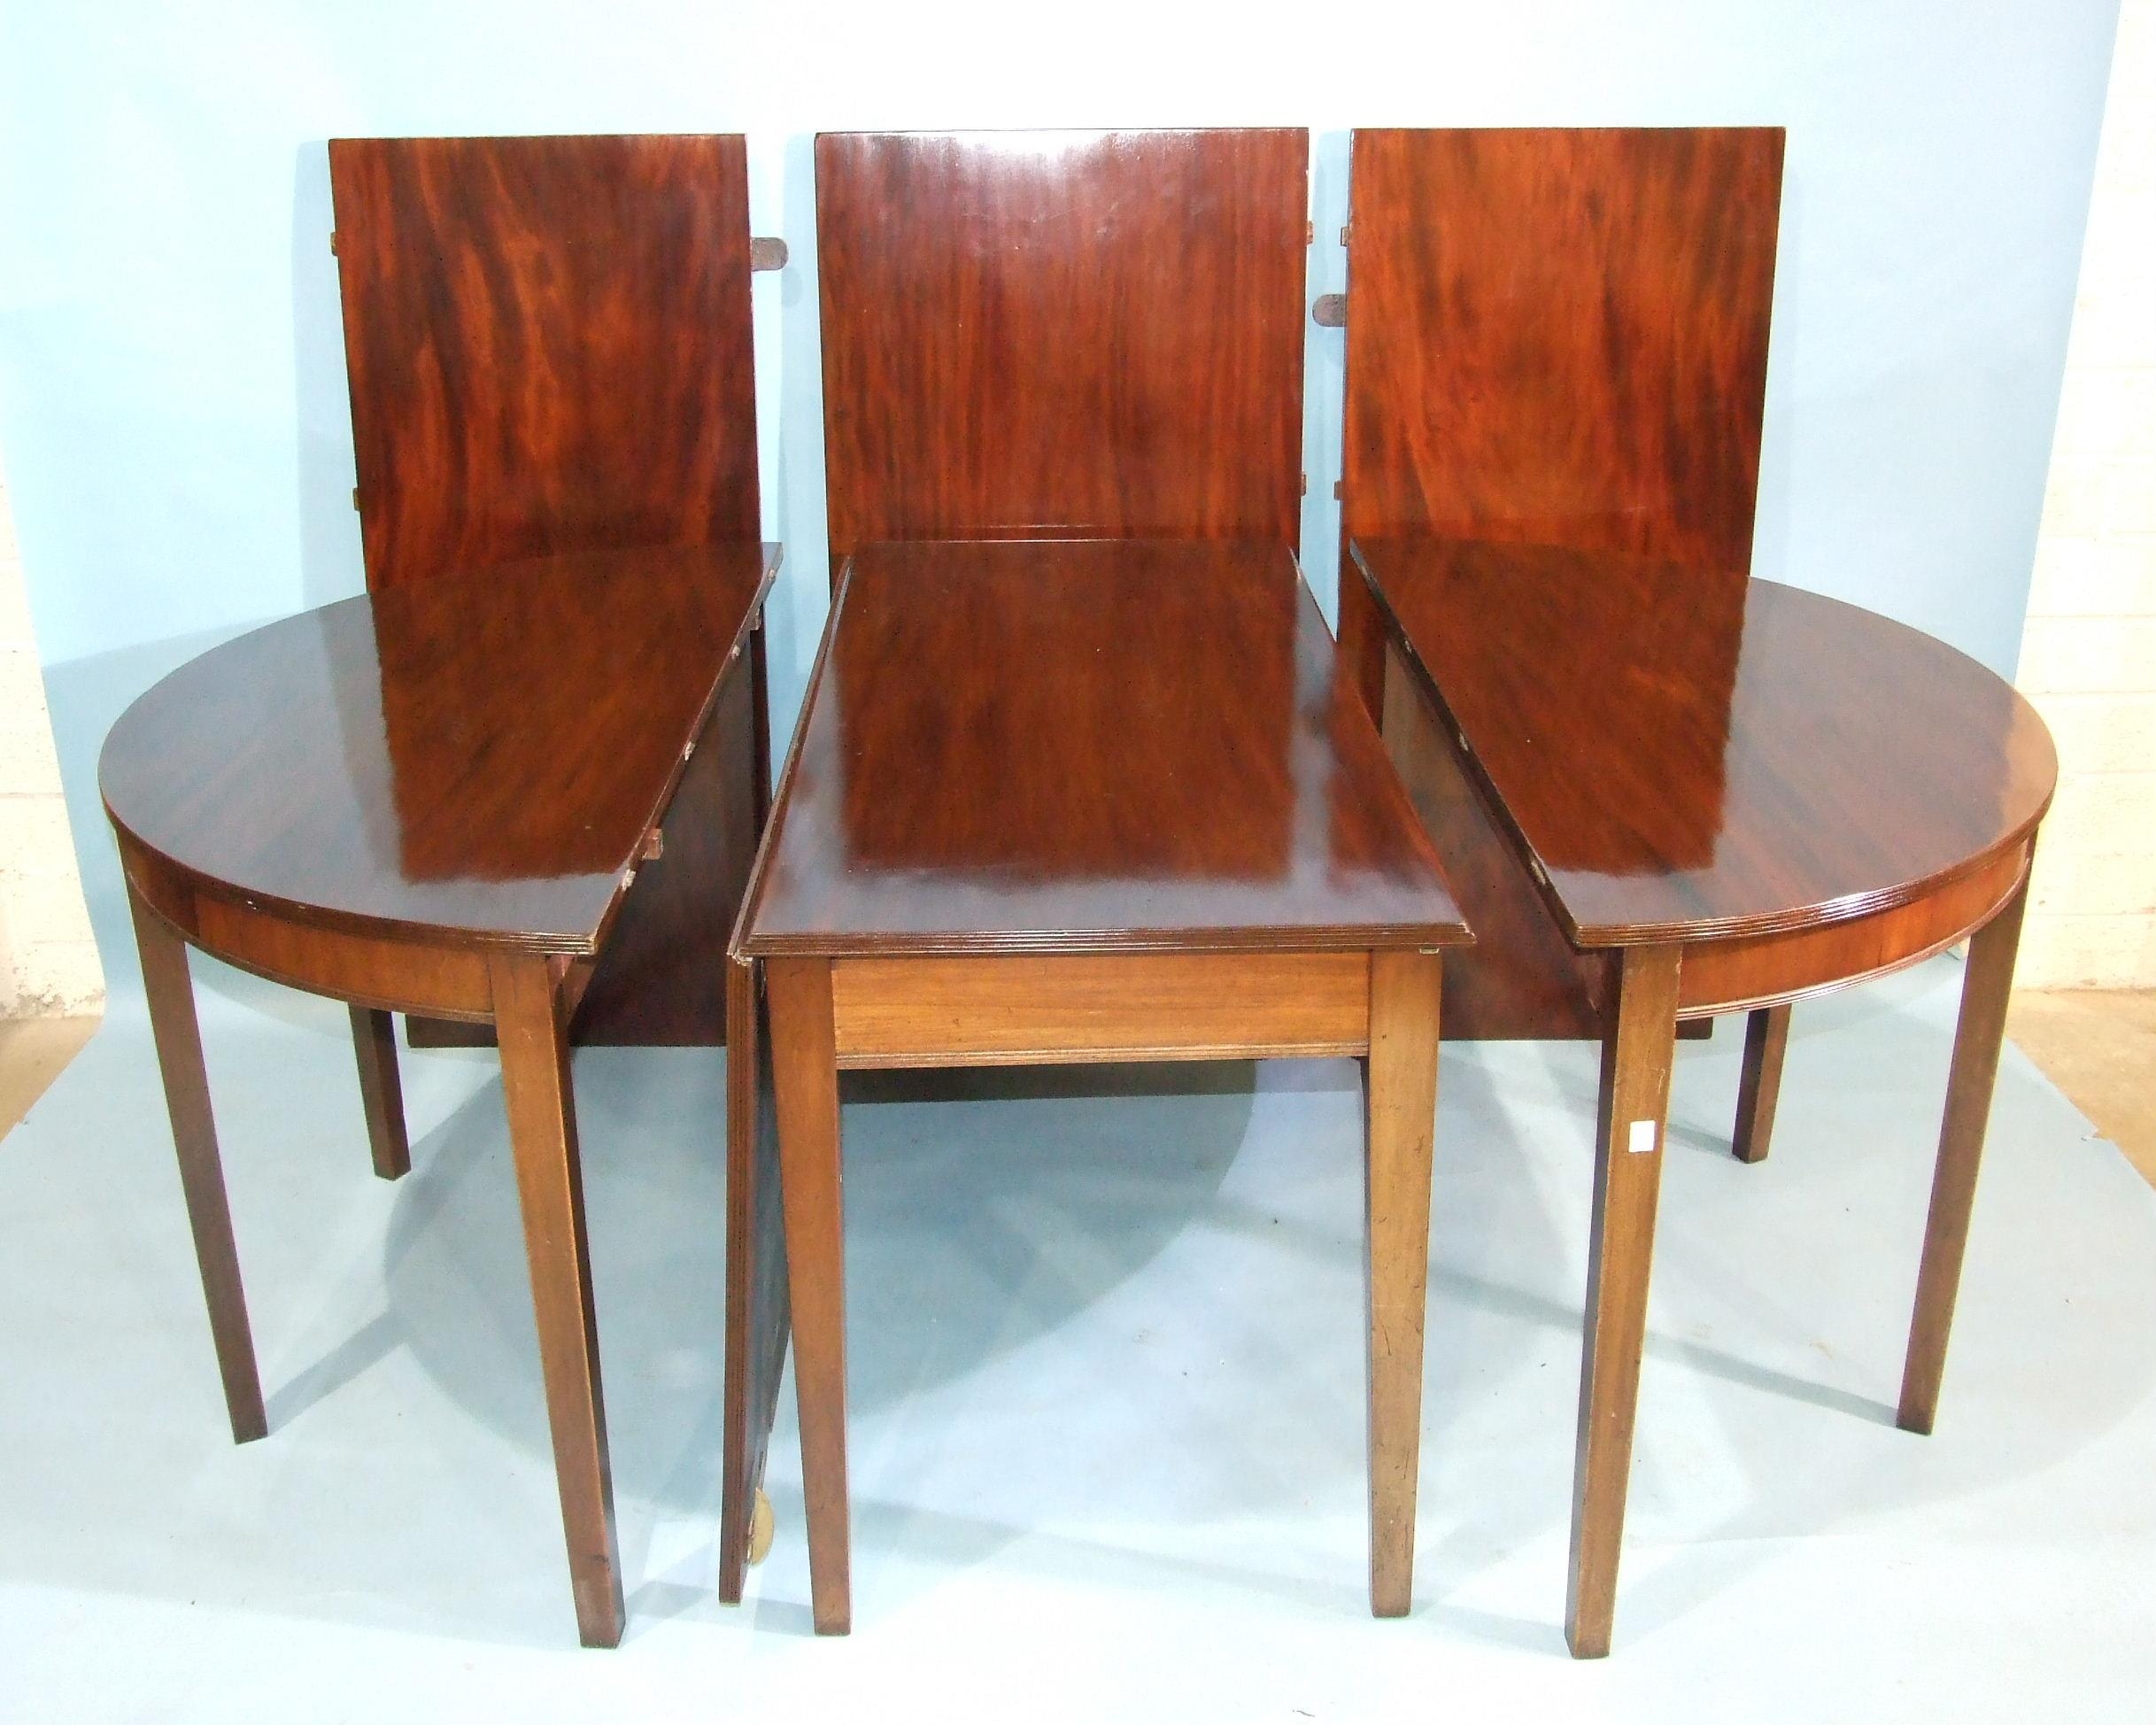 A large Georgian mahogany dining table, comprising two D-ends and drop-leaf centre section, together